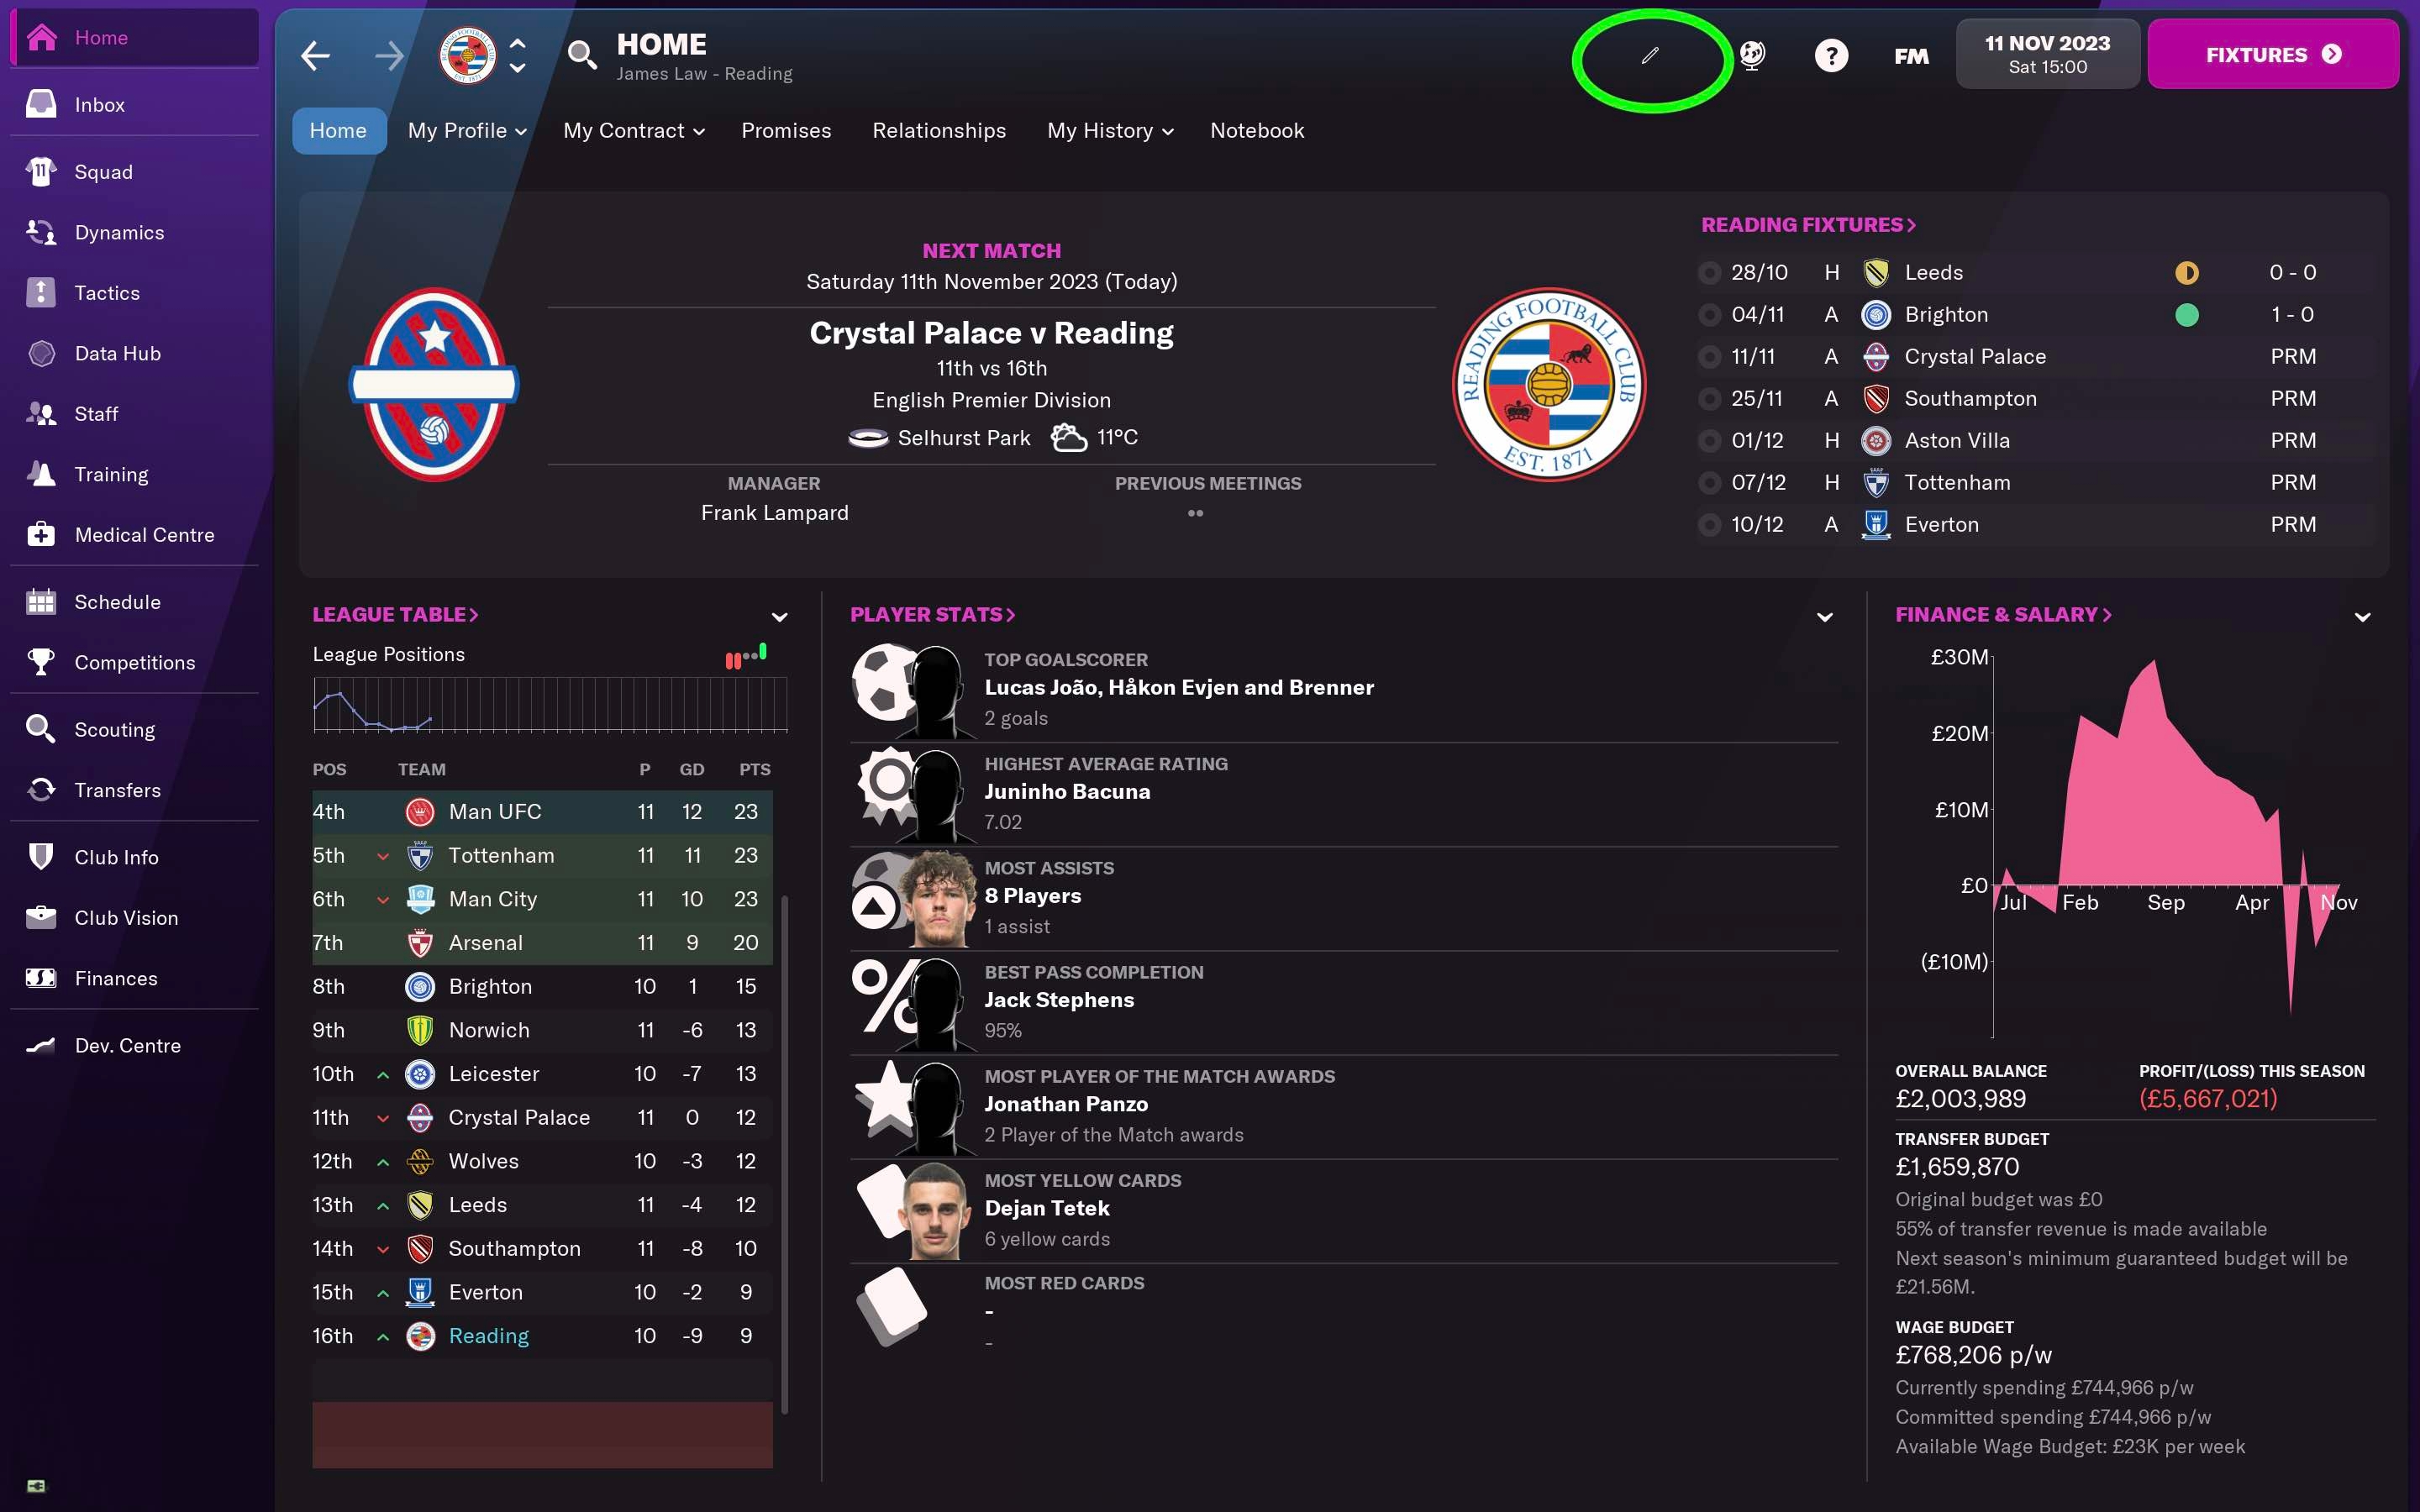 How to Download the Football Manager 2022 Editor - FAQ - Gamesplanet.com